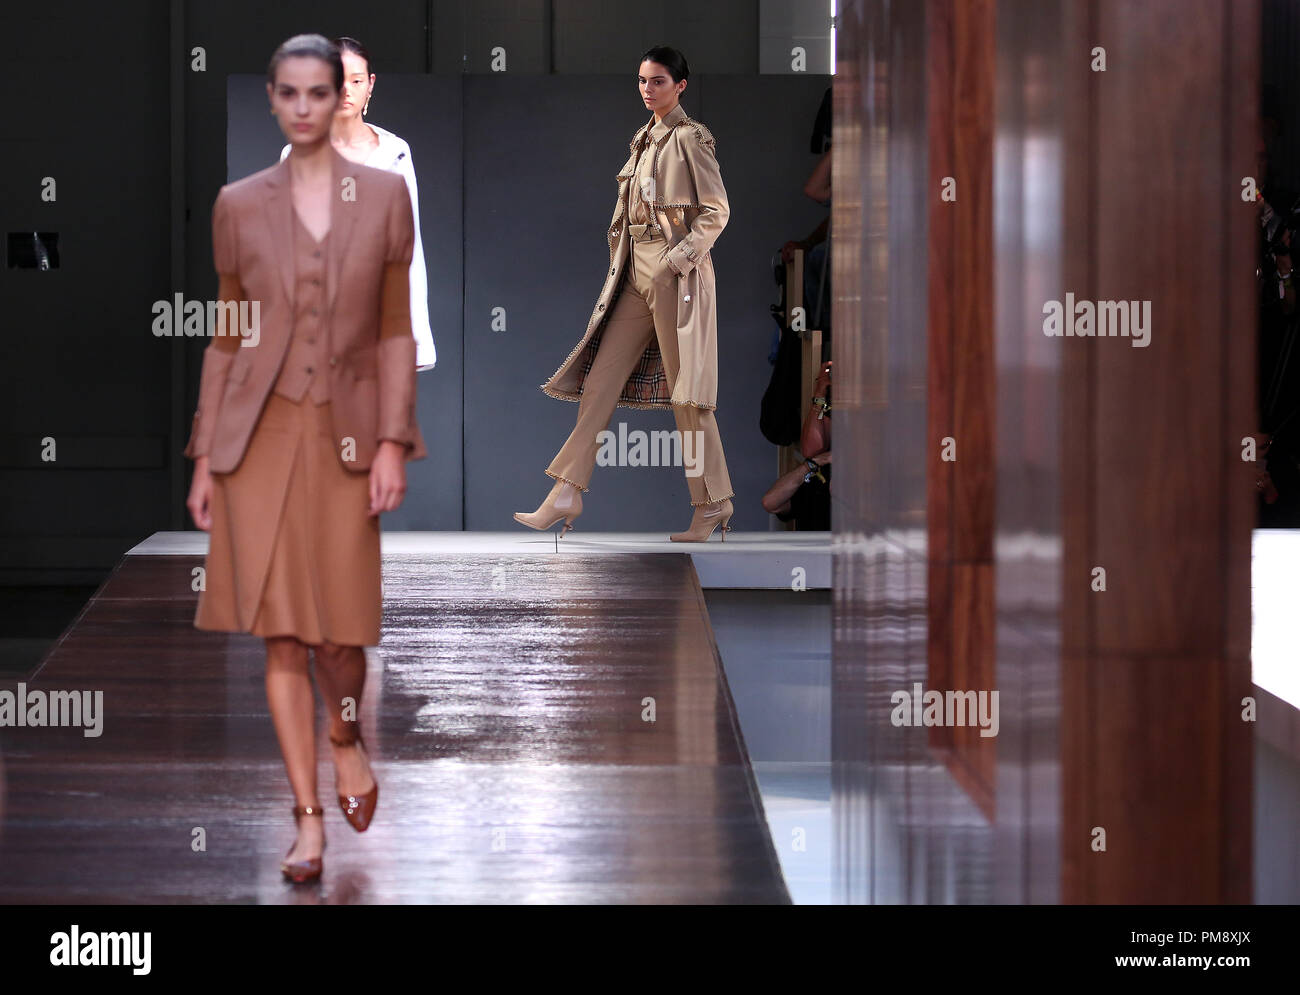 Model on the catwalk during the Burberry London Fashion Week SS19 show held at The South London Mail Centre Stock Photo - Alamy